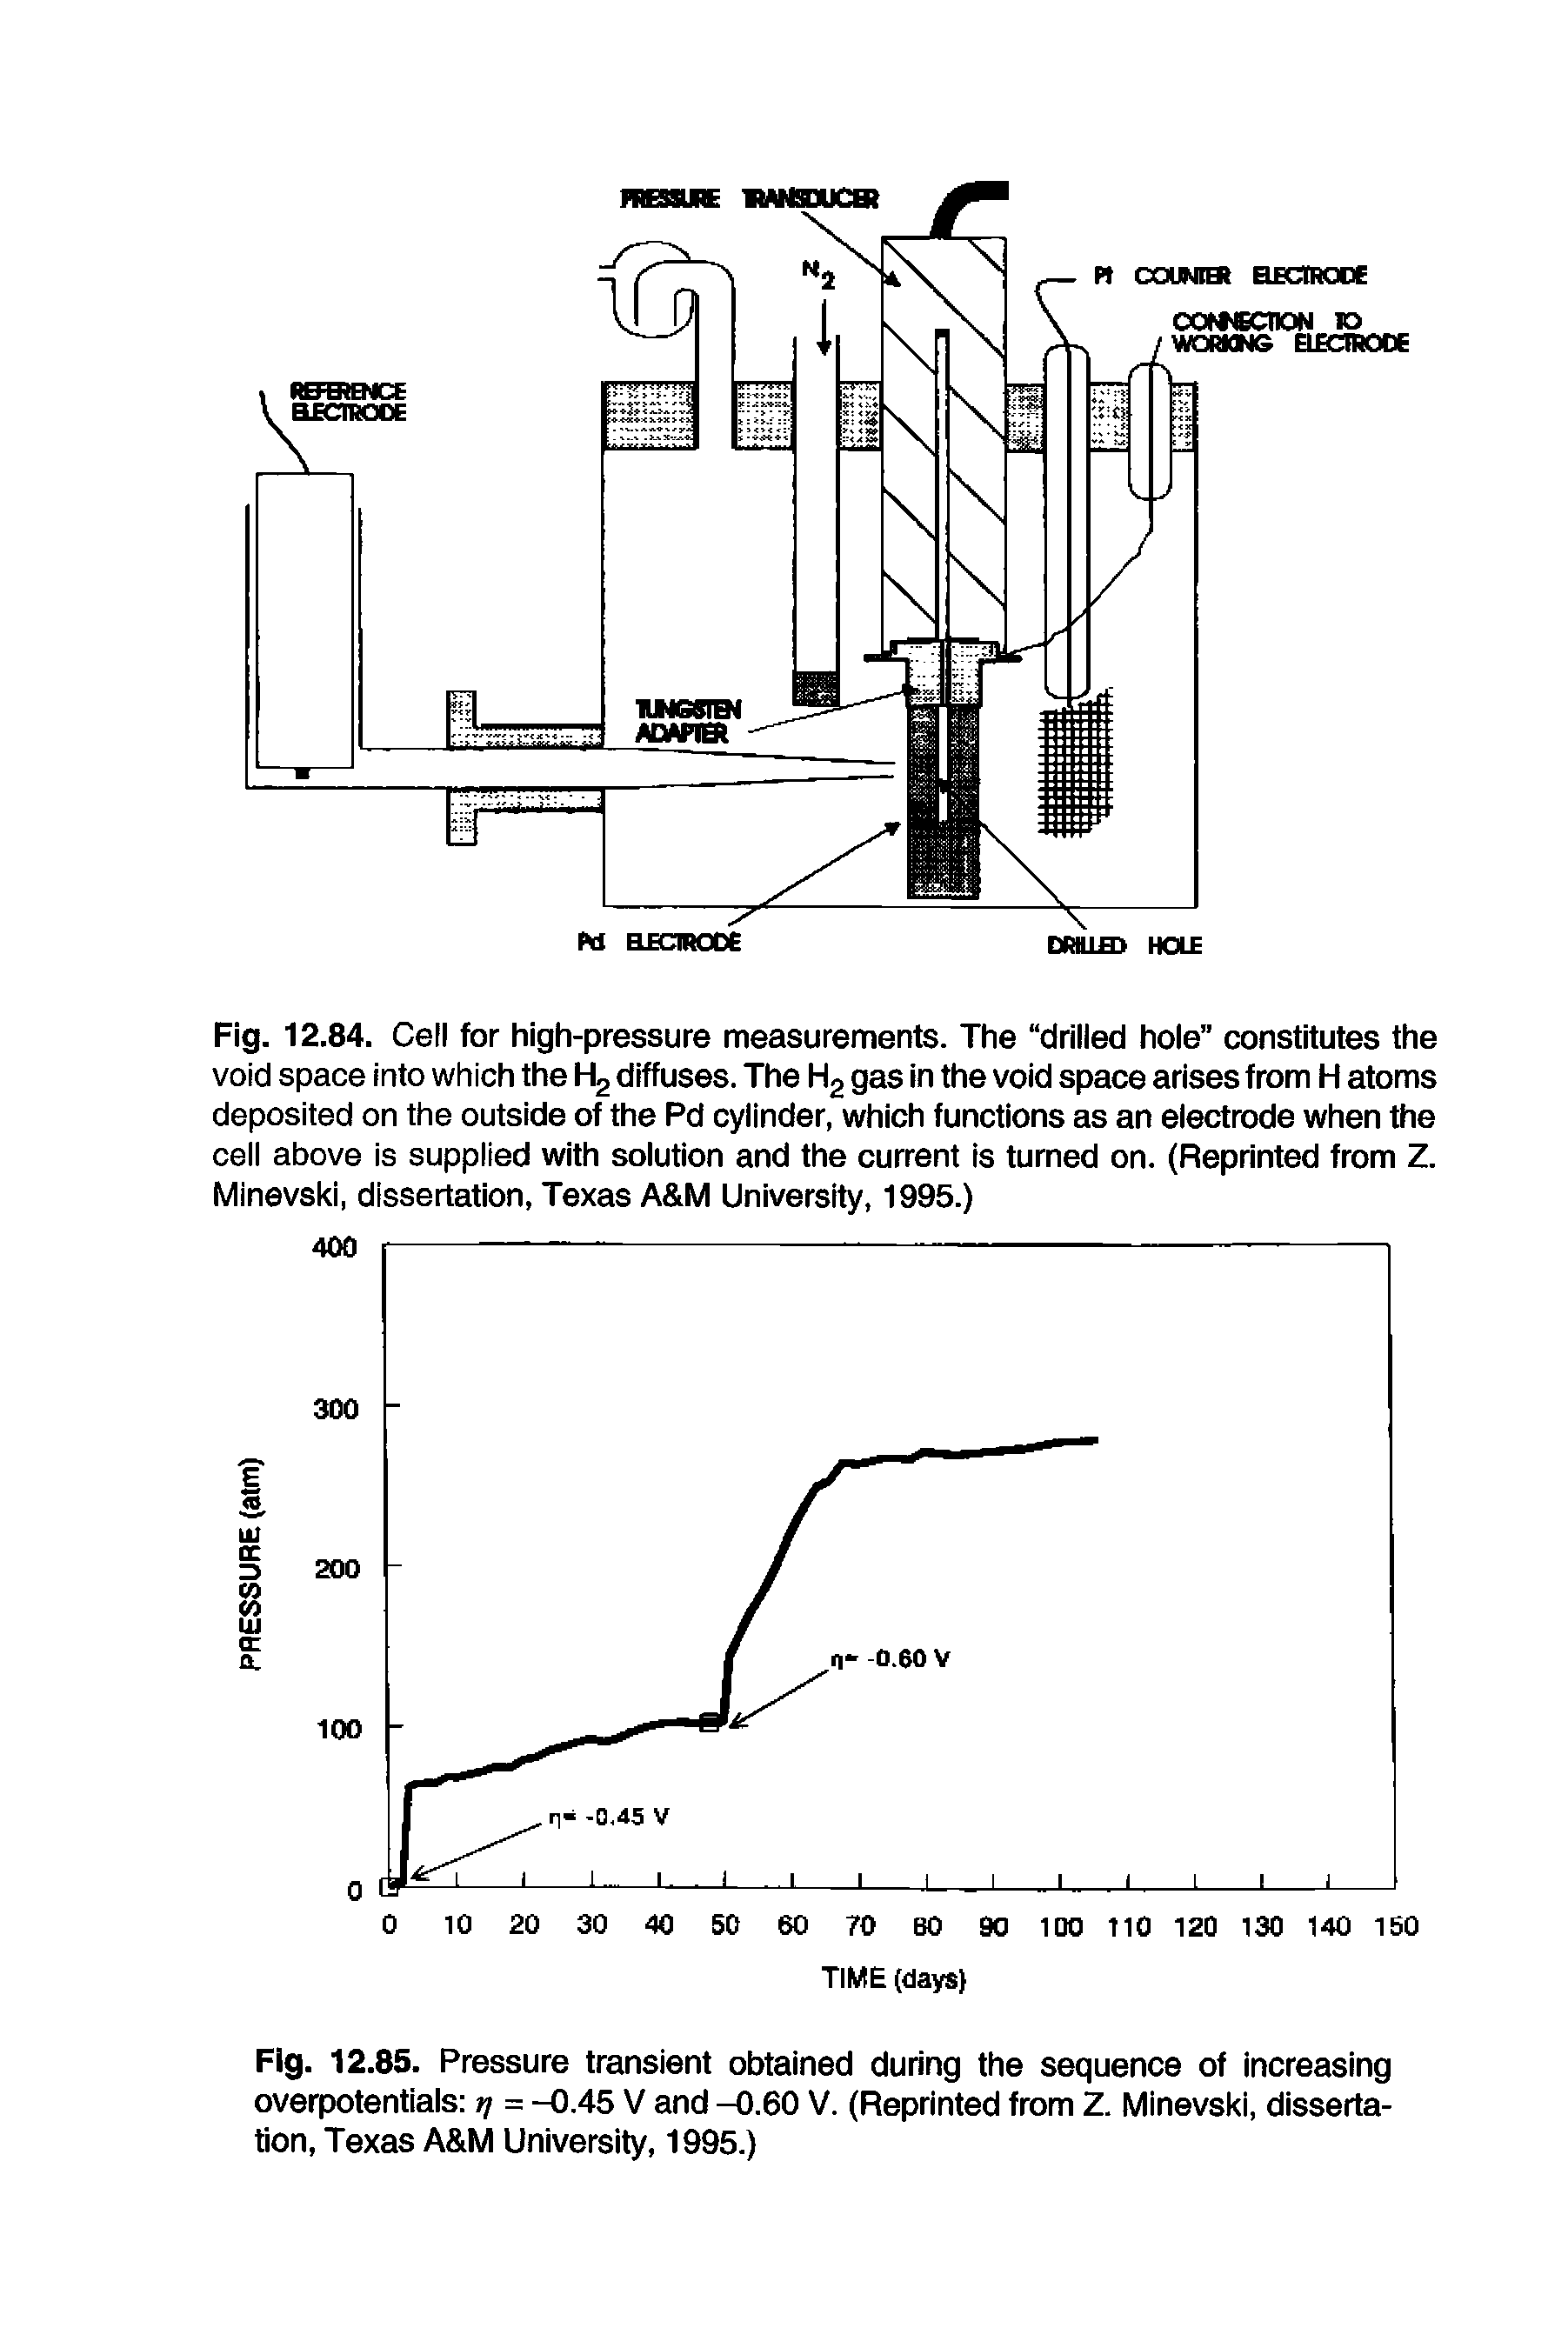 Fig. 12.85. Pressure transient obtained during the sequence of increasing overpotentials q = -0.45 V and -0.60 V. (Reprinted from Z. Minevski, dissertation, Texas A M University, 1995.)...